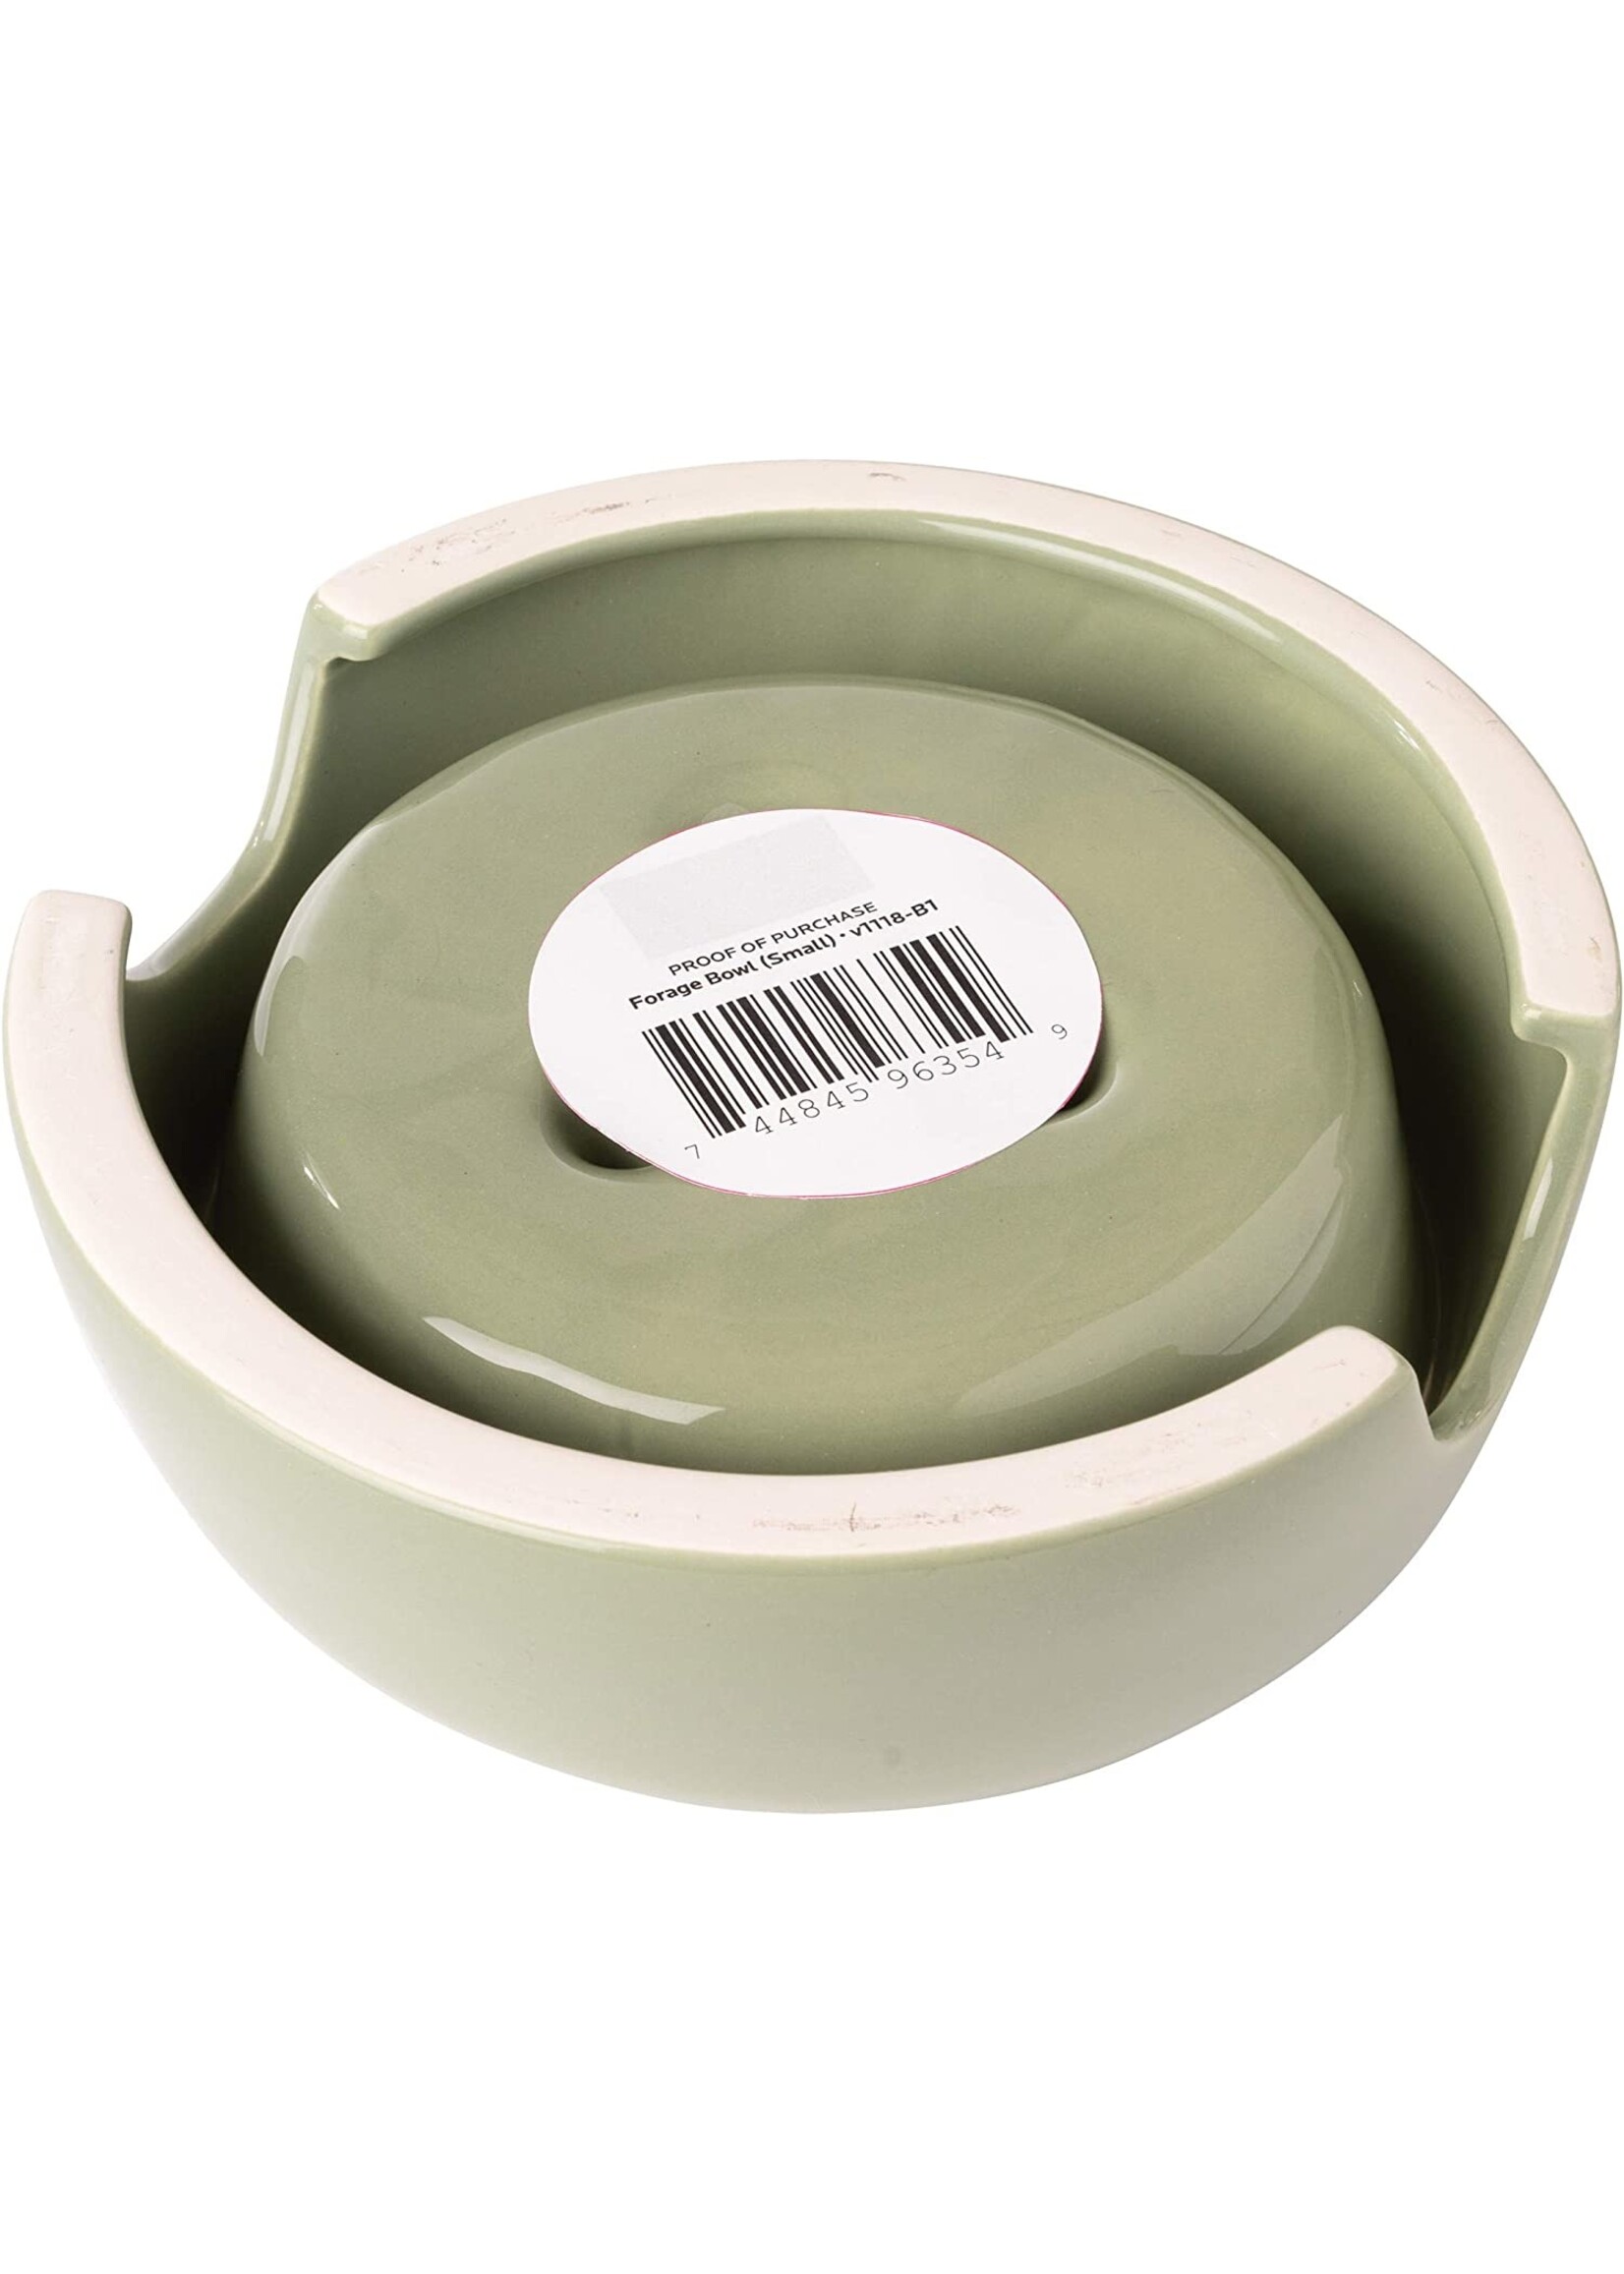 Oxbow Oxbow Enriched Life Forage Bowl